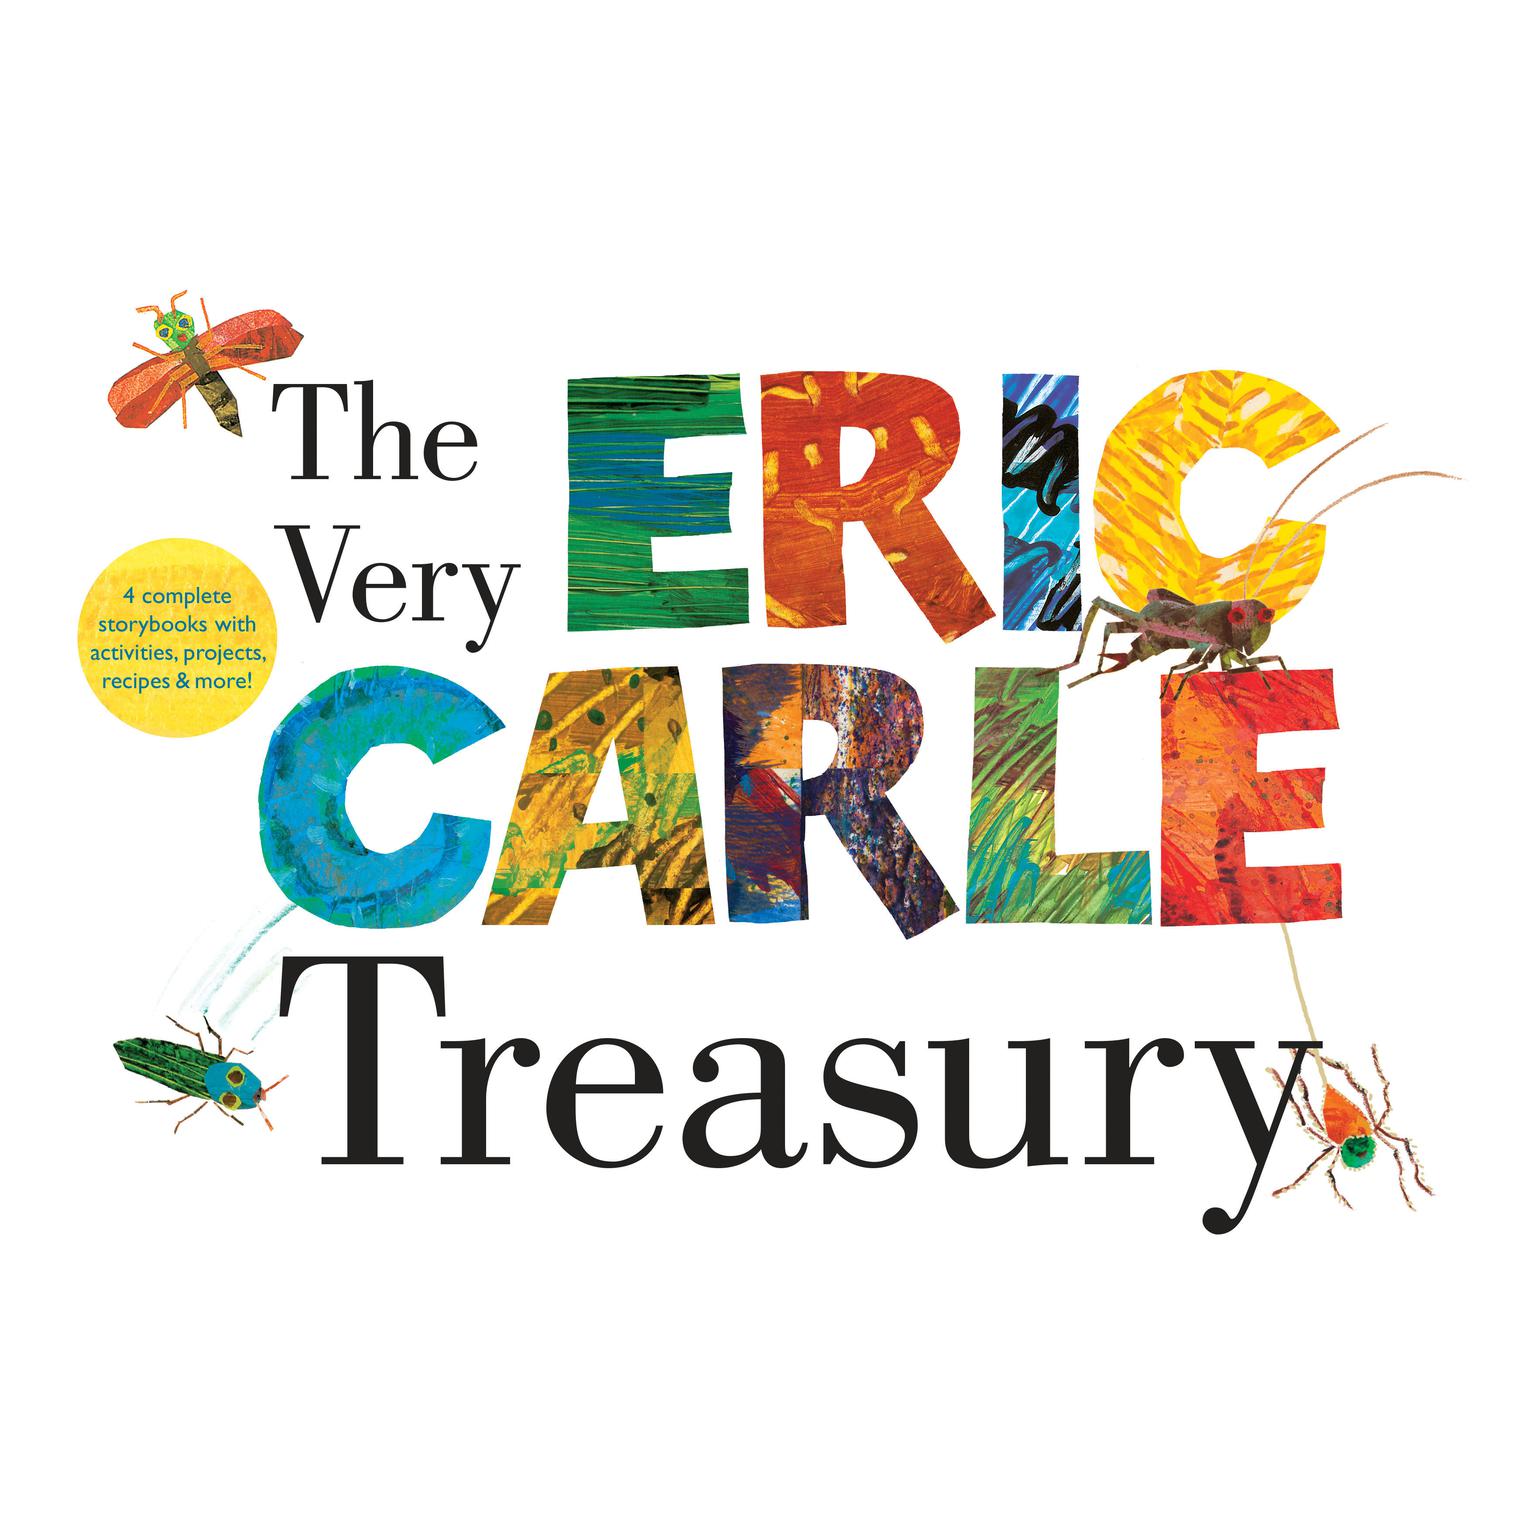 The Very Eric Carle Treasury: The Very Busy Spider; The Very Quiet Cricket; The Very Clumsy Click Beetle; and The Very Lonely Firefly Audiobook, by Eric Carle